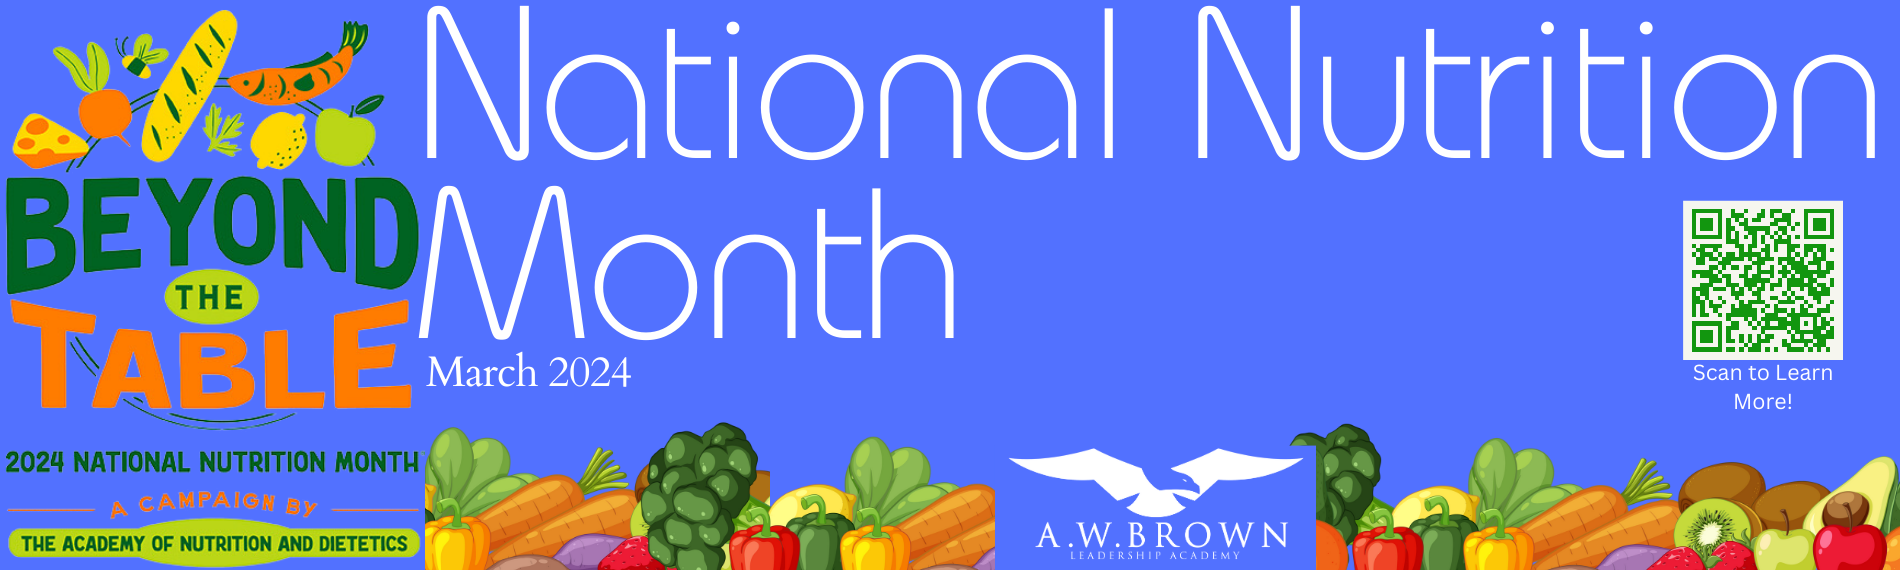 National Nutrion Month